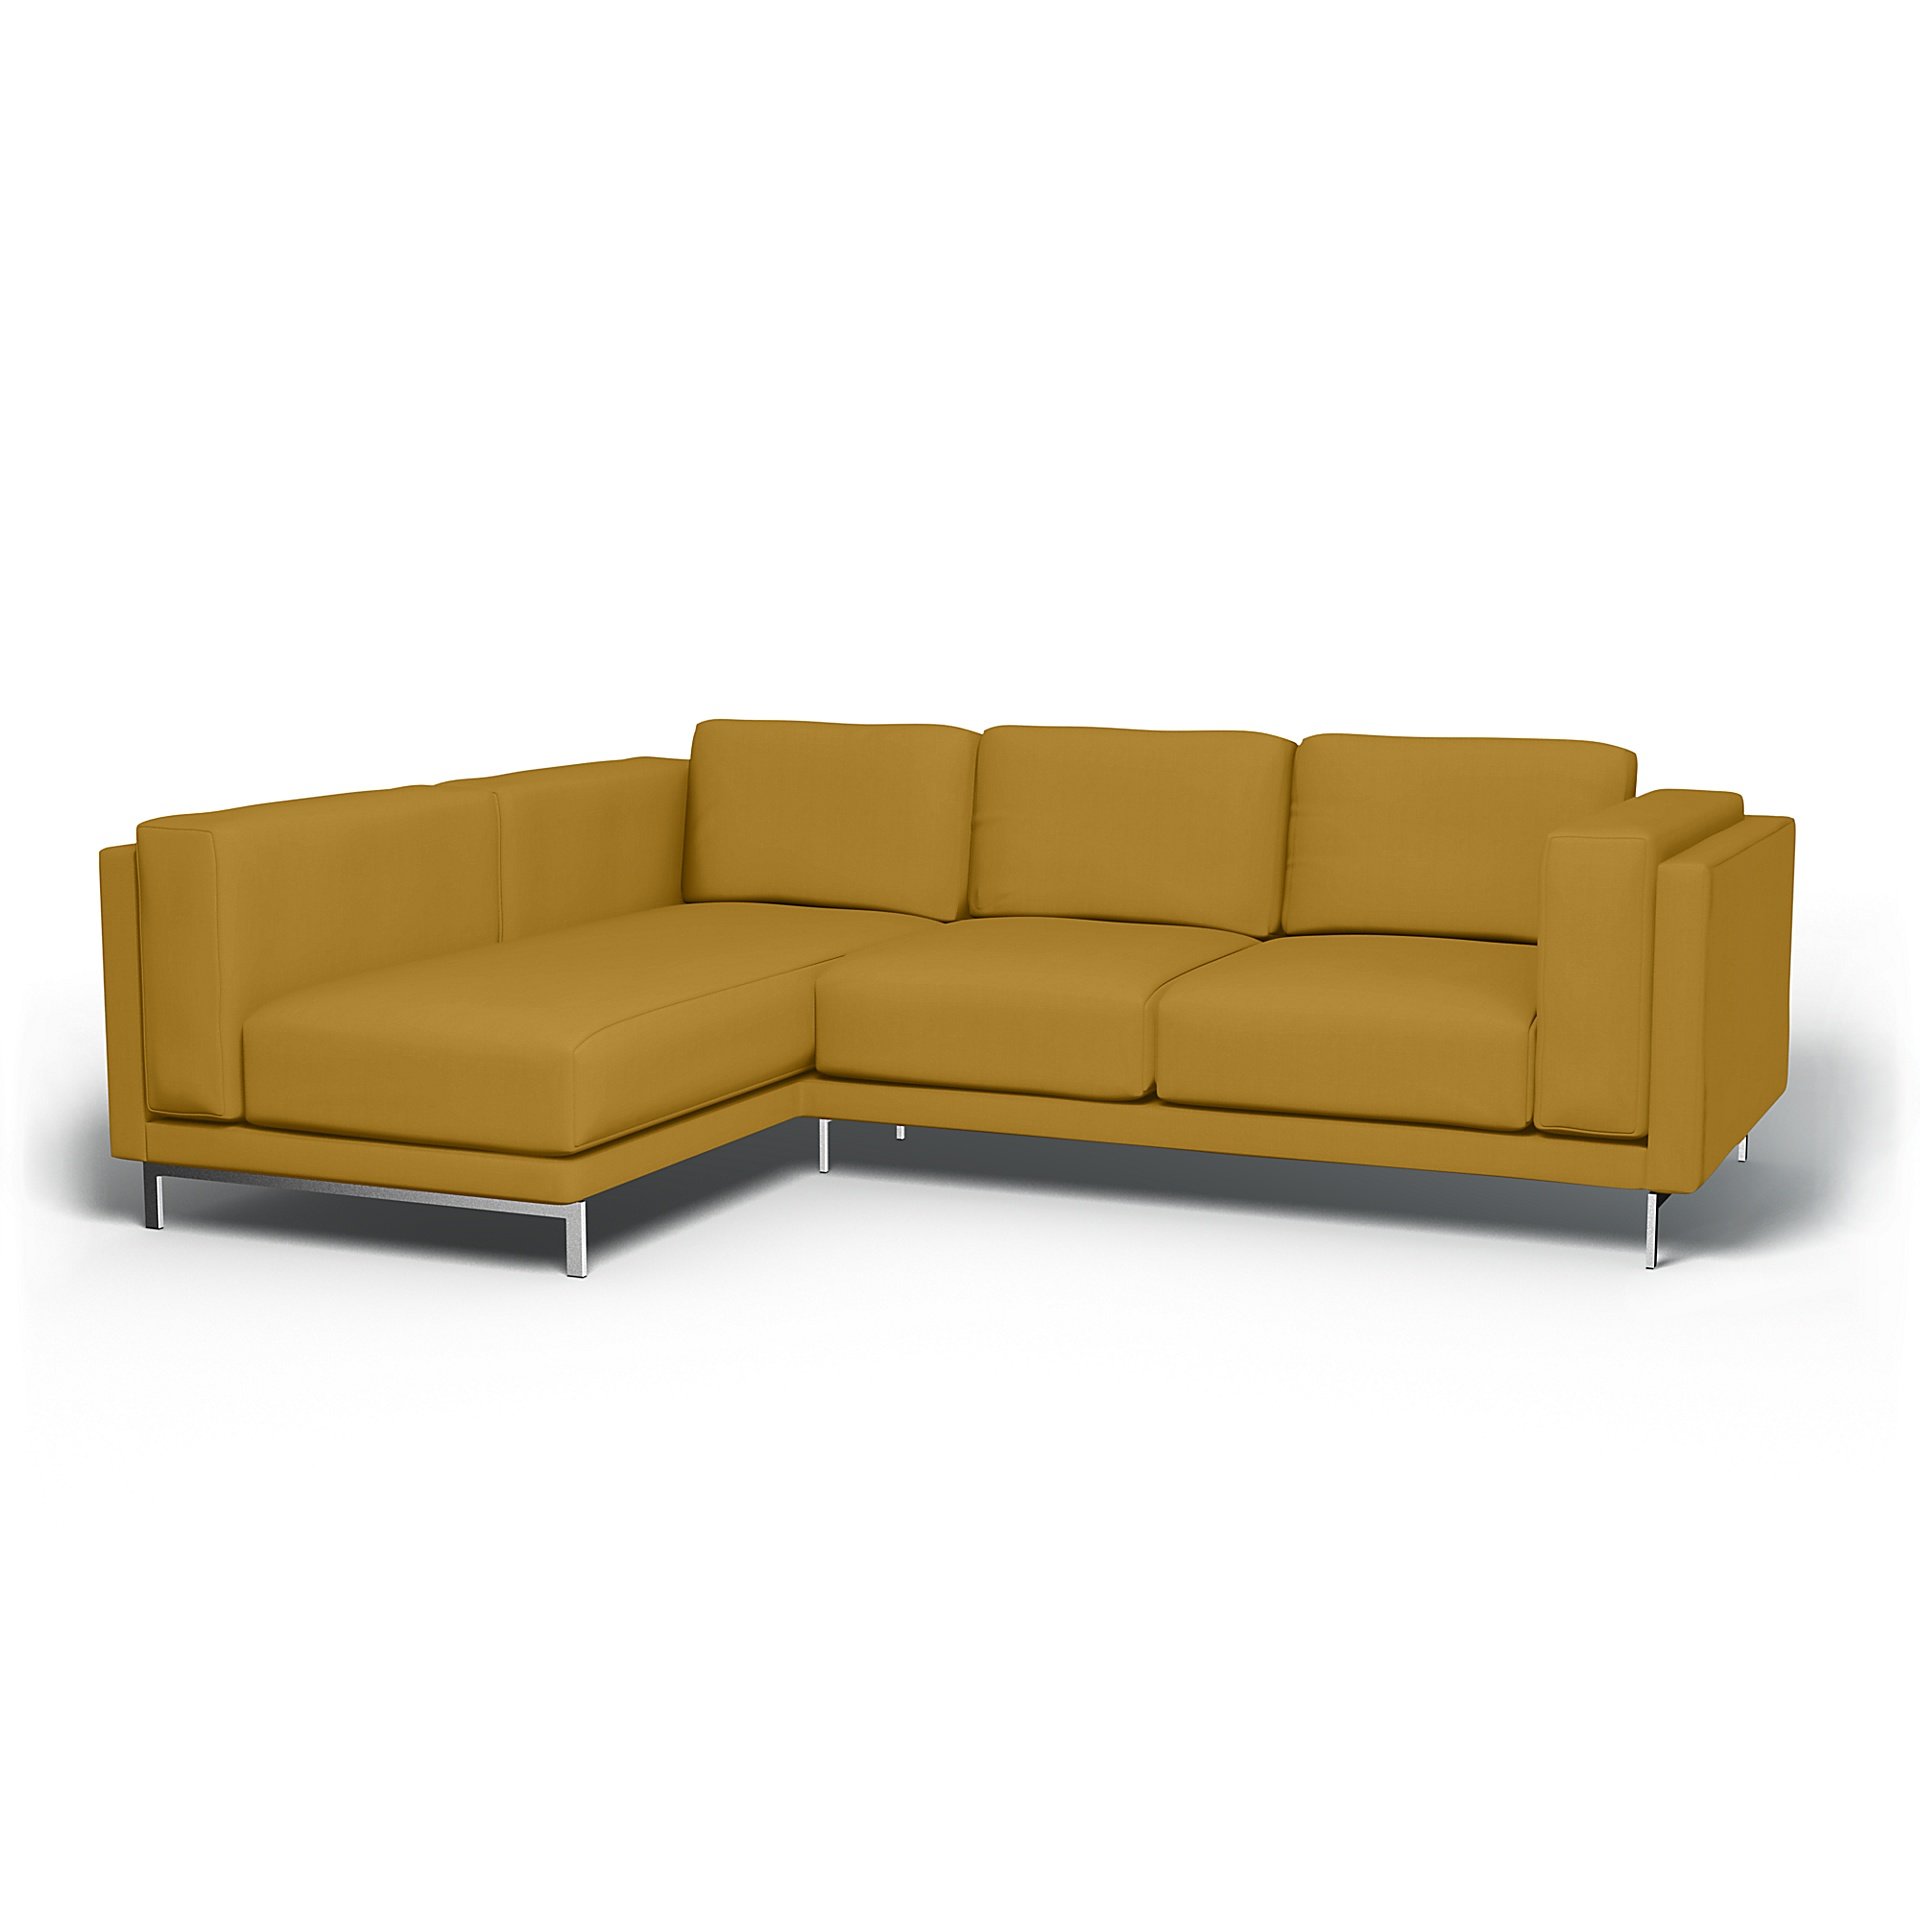 IKEA - Nockeby 3 Seater Sofa with Left Chaise Cover, Honey Mustard, Cotton - Bemz